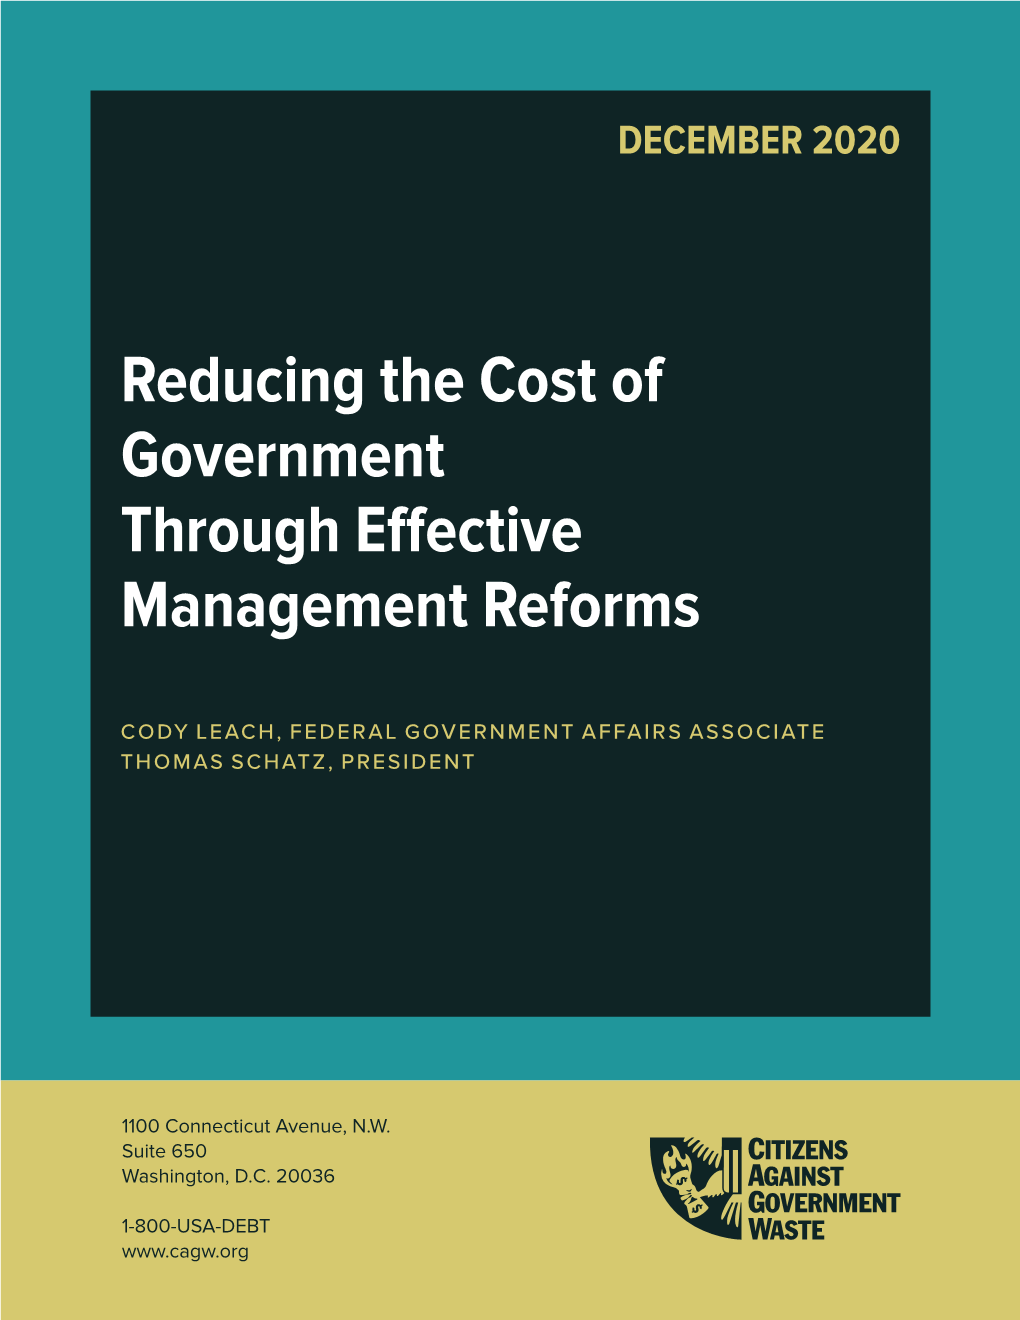 Reducing the Cost of Government Through Effective Management Reforms